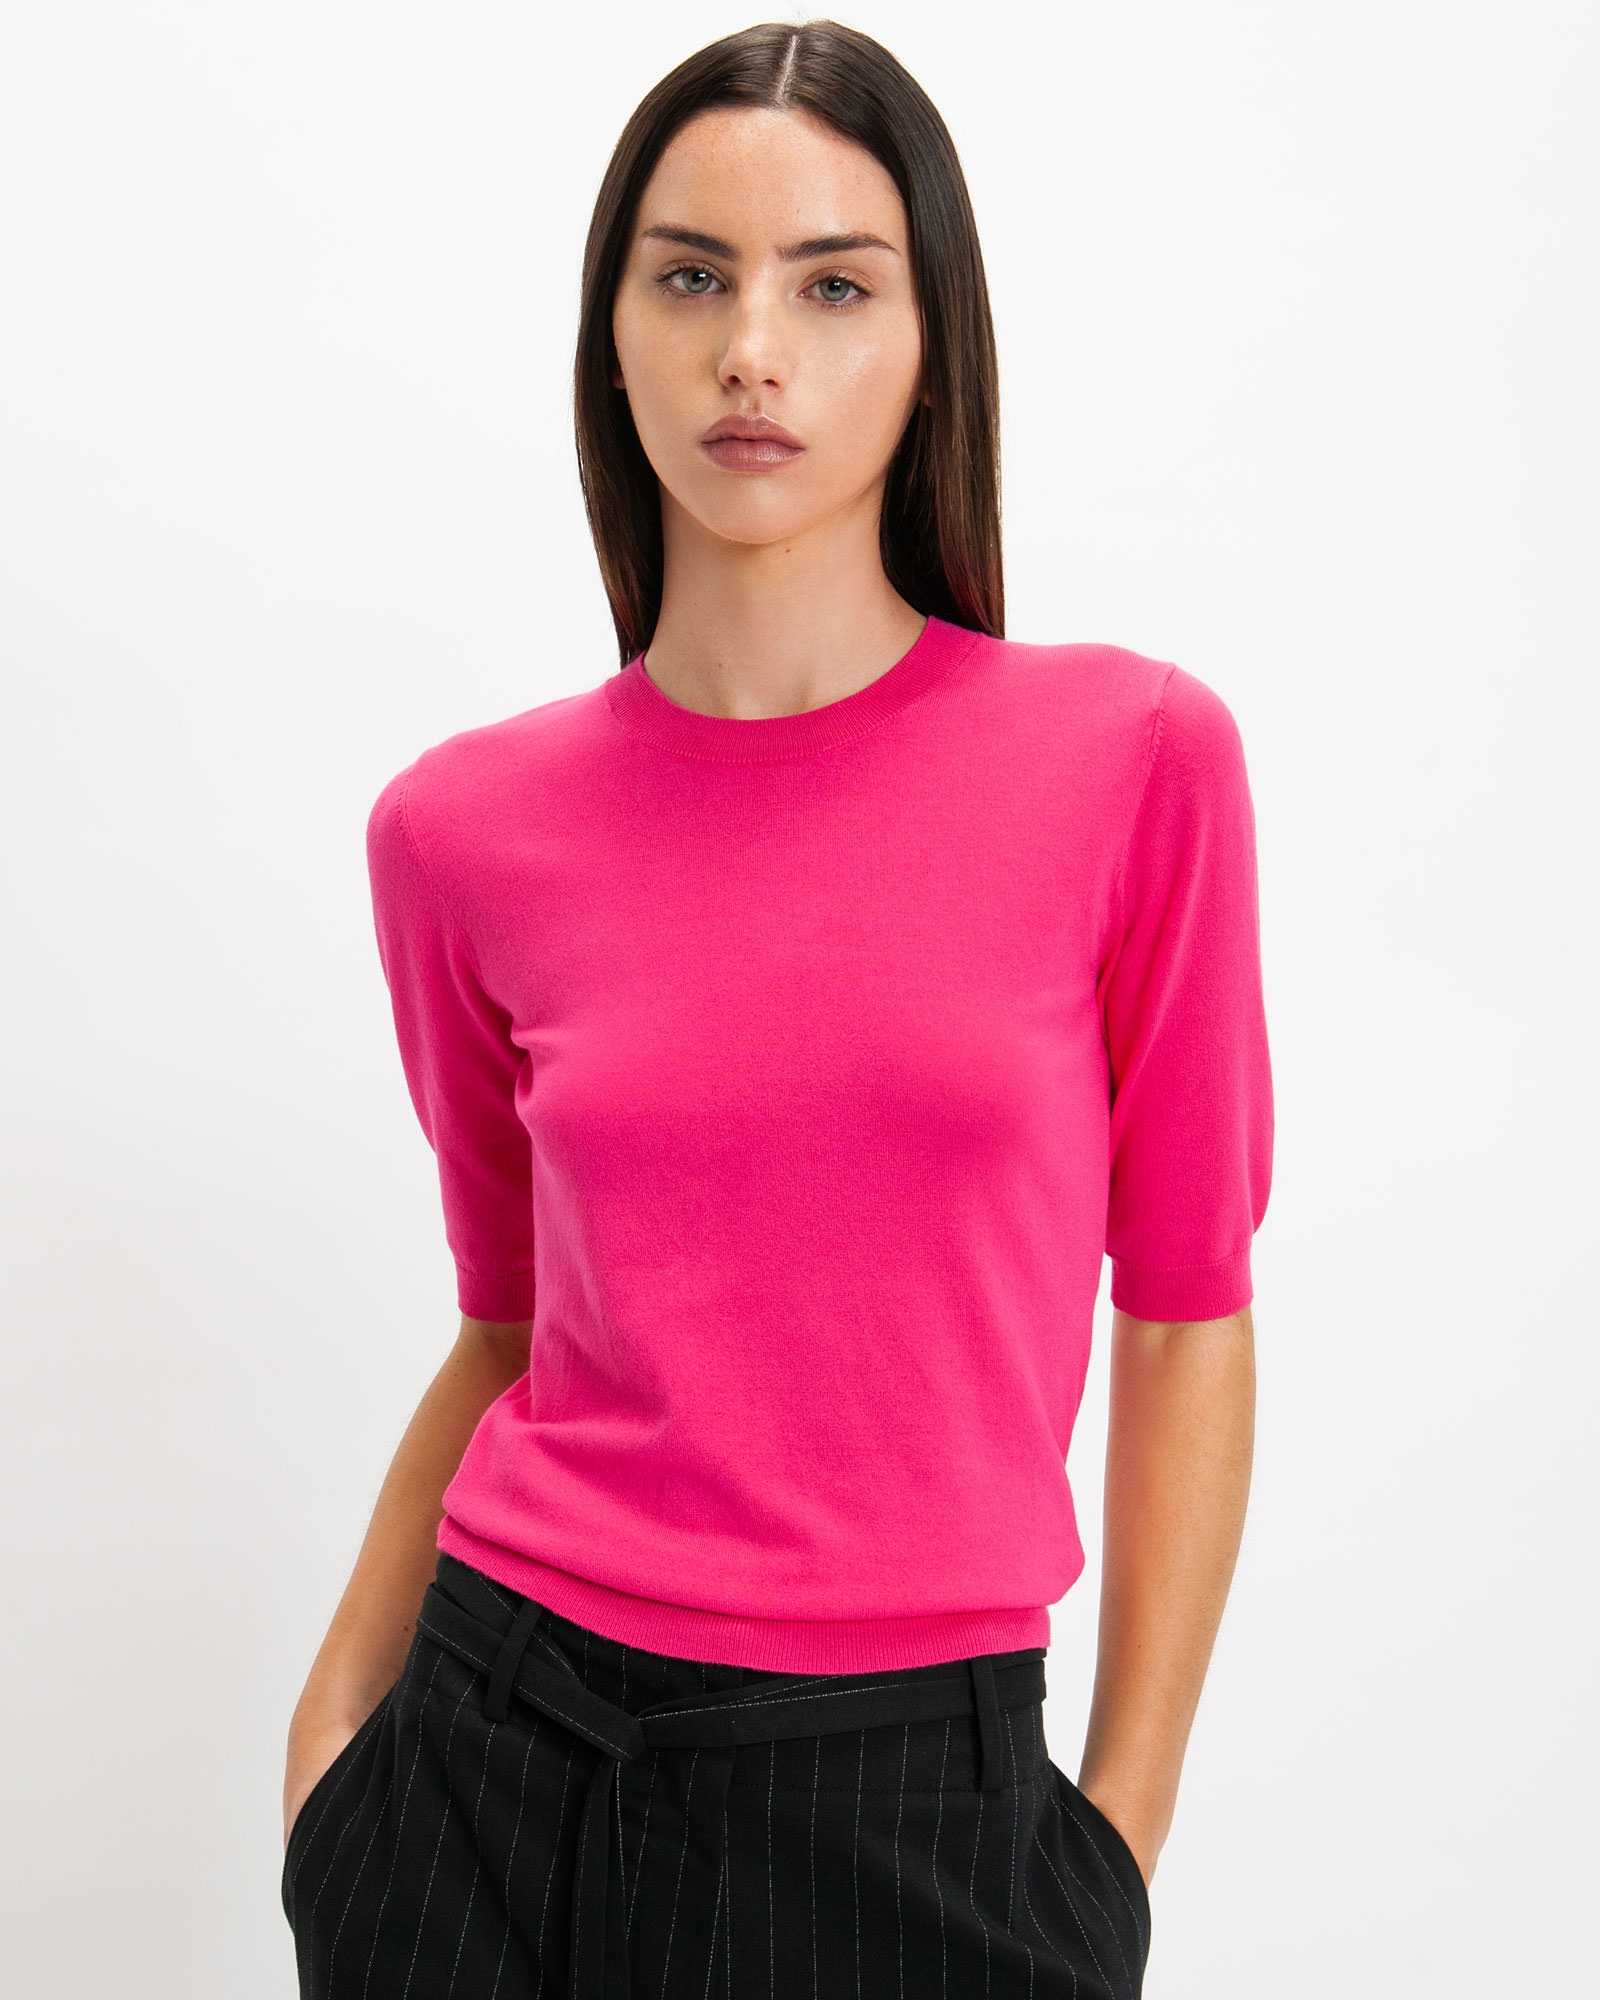 Tops and Shirts | Elbow Sleeve Round Neck Knit | 519 Hot Pink